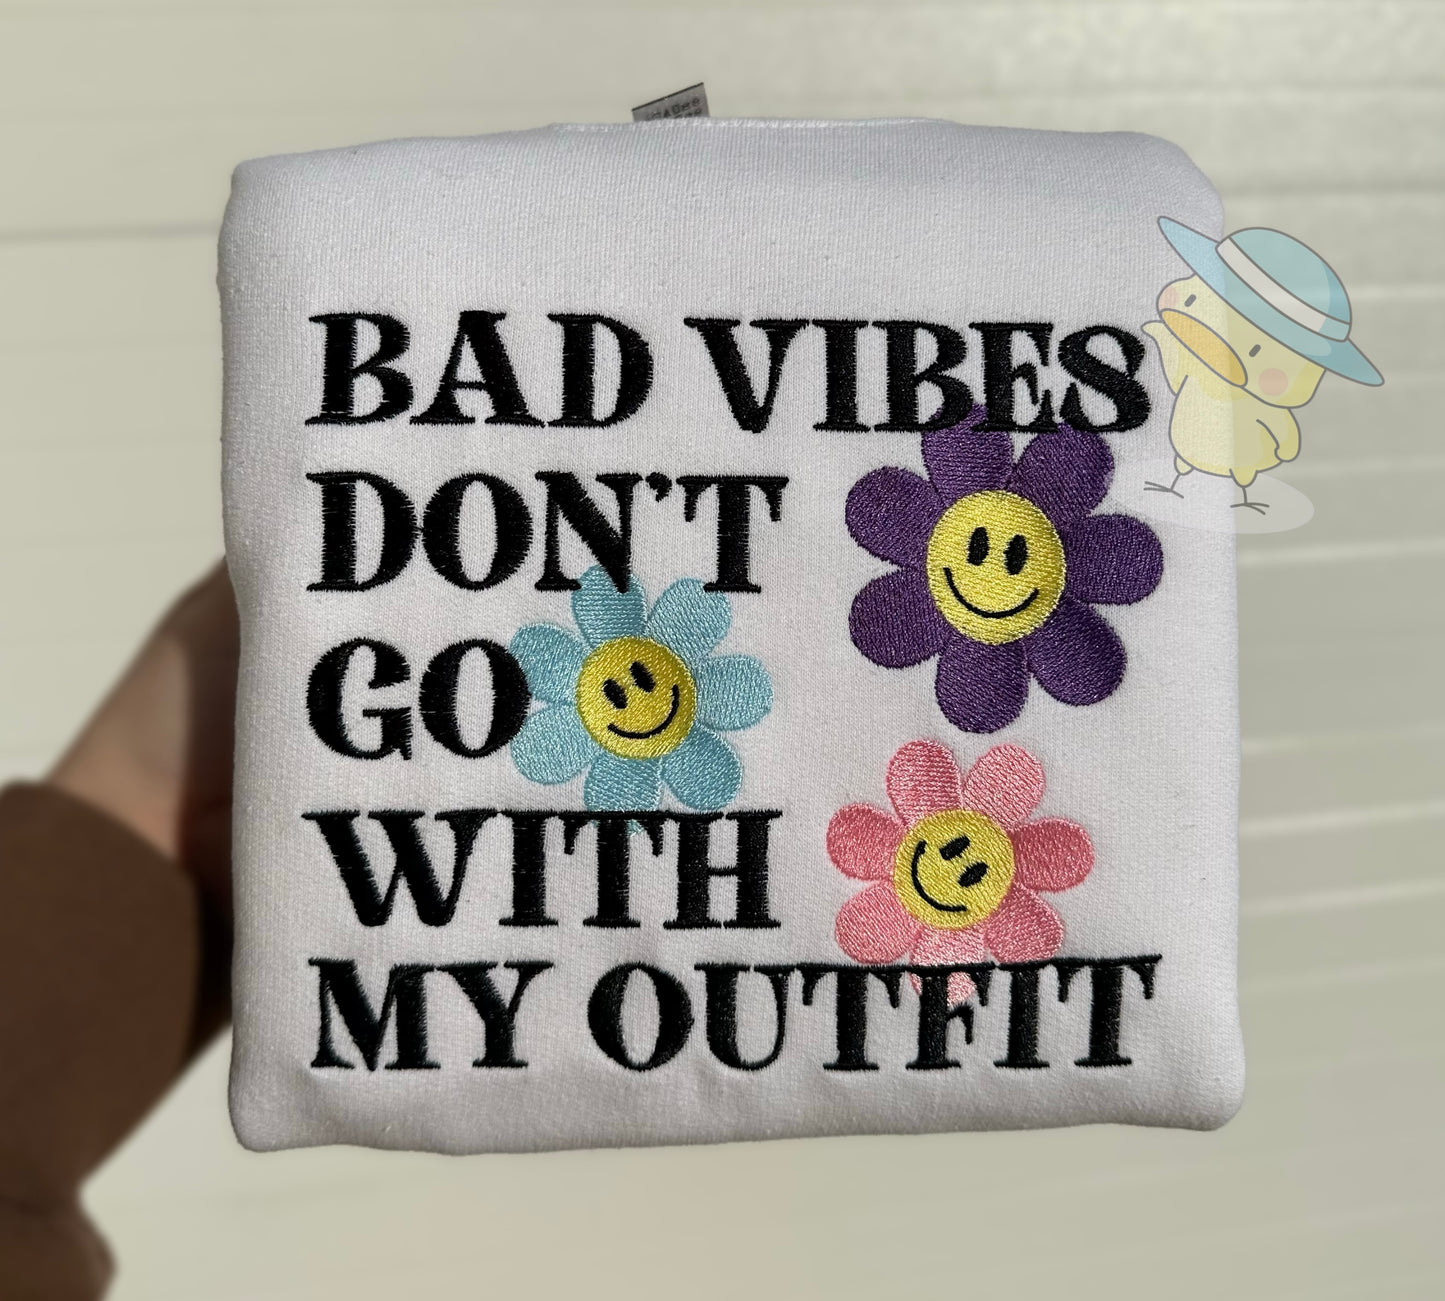 Bad Vibes Don’t Go With My Outfit 8x10 Embroidery Crewneck Sweatshirt